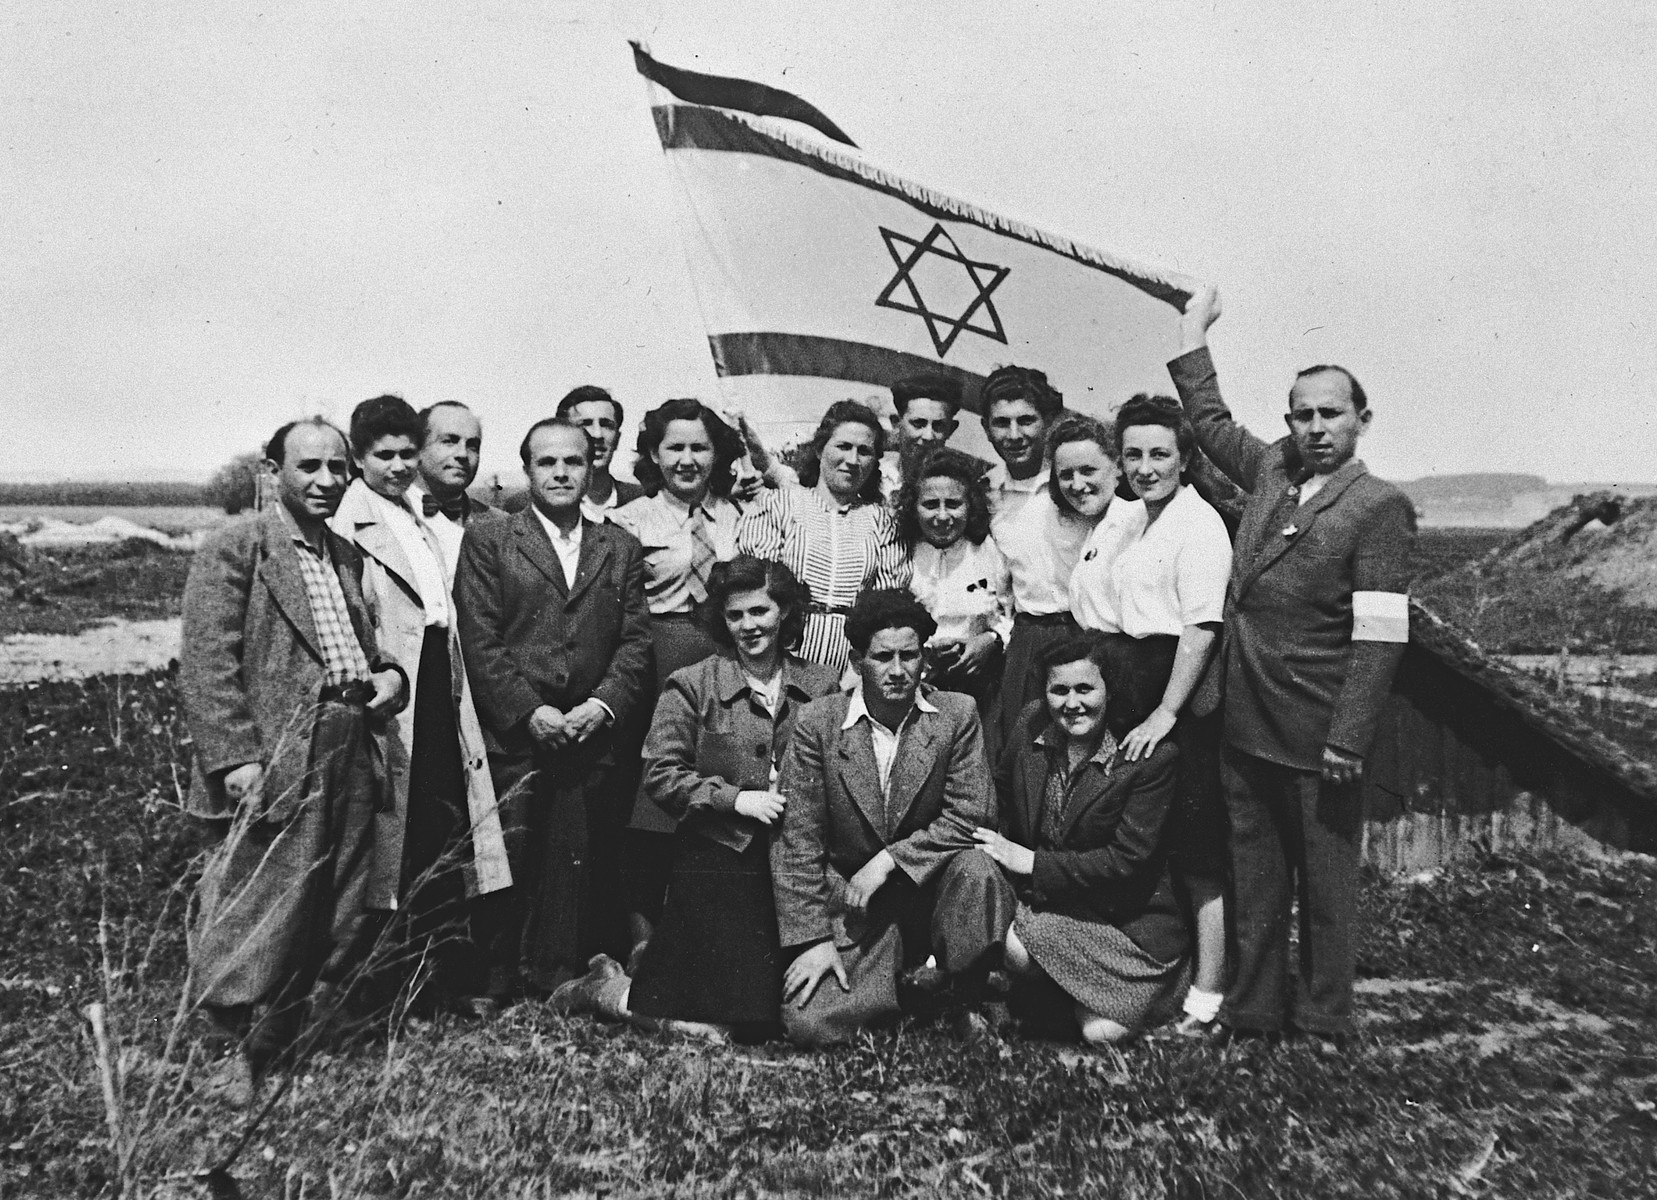 Jewish displaced persons n the Landsberg camp gather for a group portrait underneath a large Israeli flag.

Among those pictured are Max Freidberg (third from left) and Rachel Freidberg (sixth from left in a white blouse and tie).